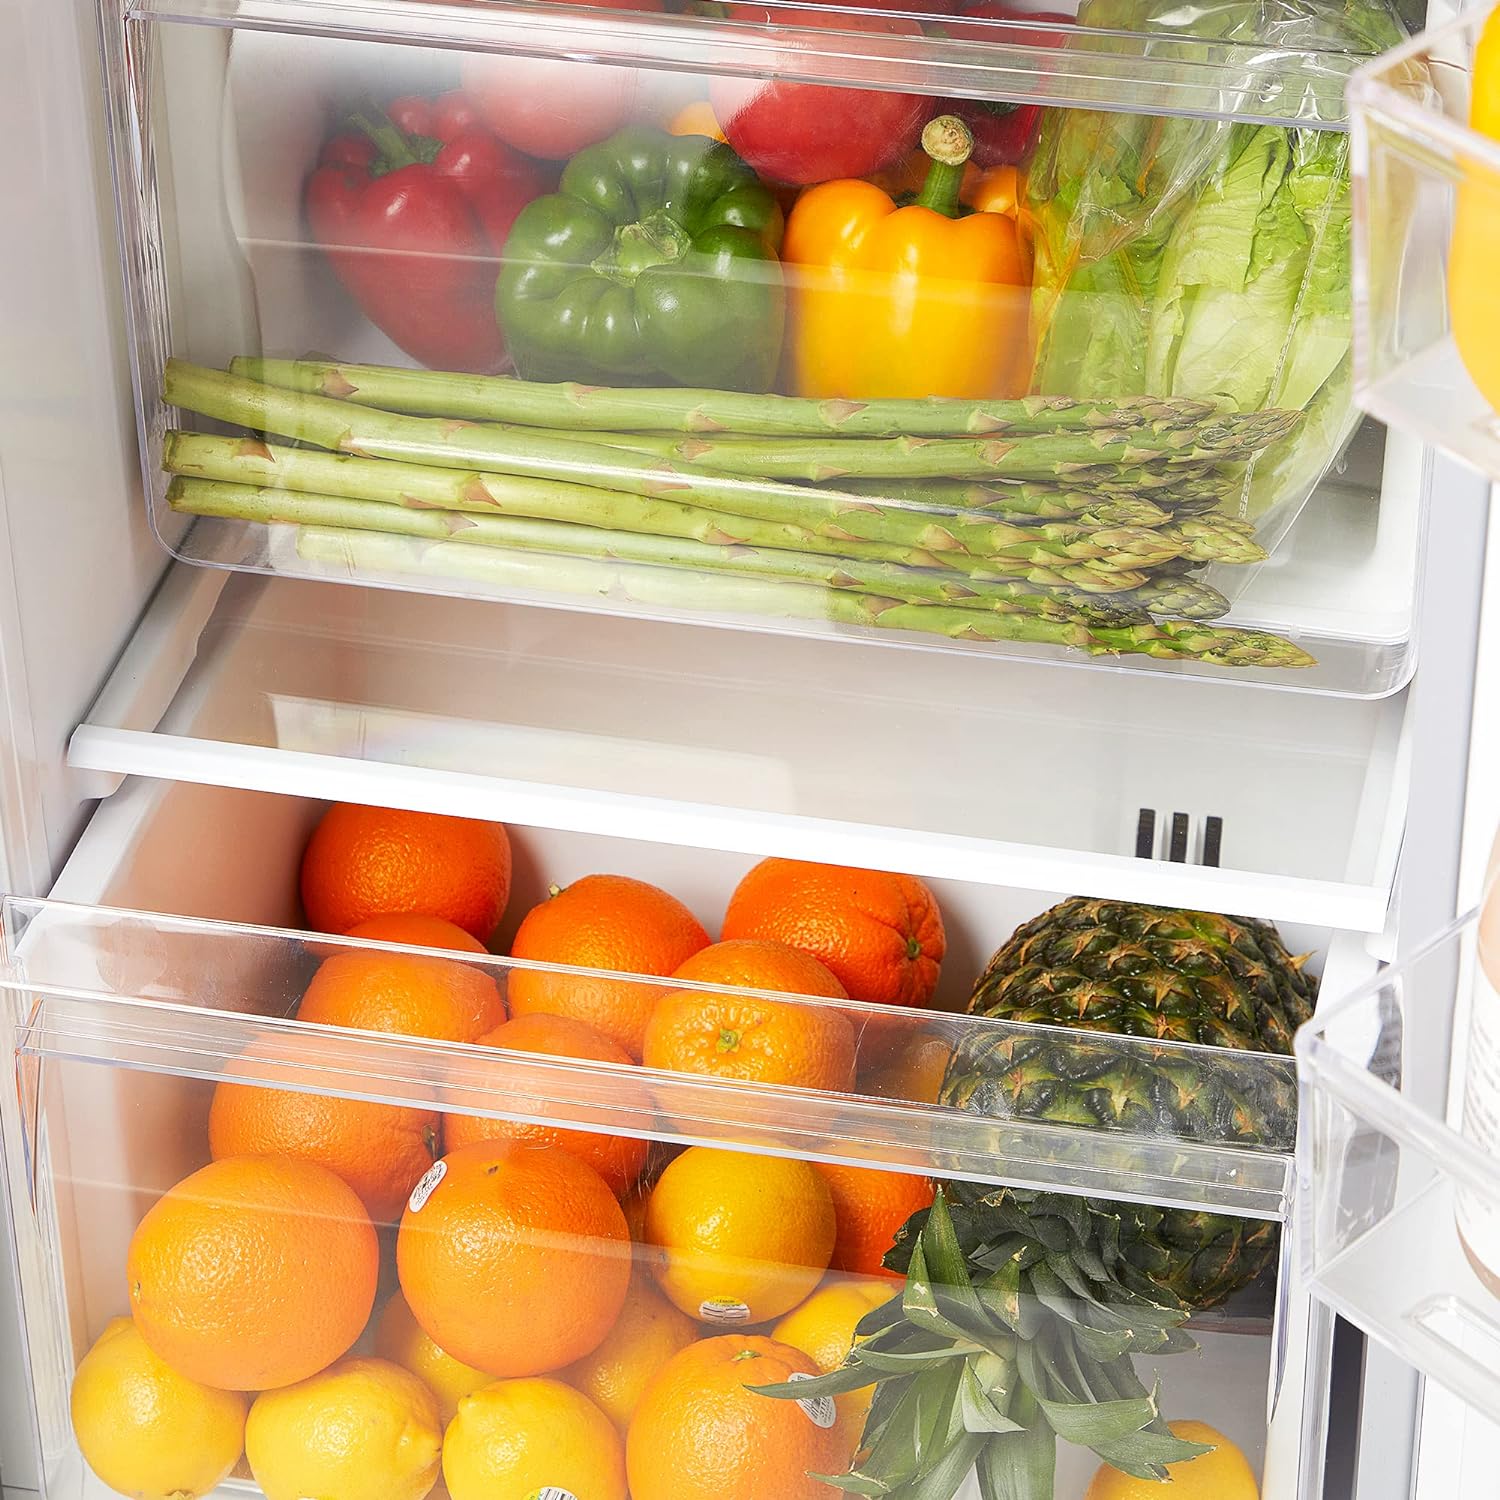 Internal structure of a refrigerator